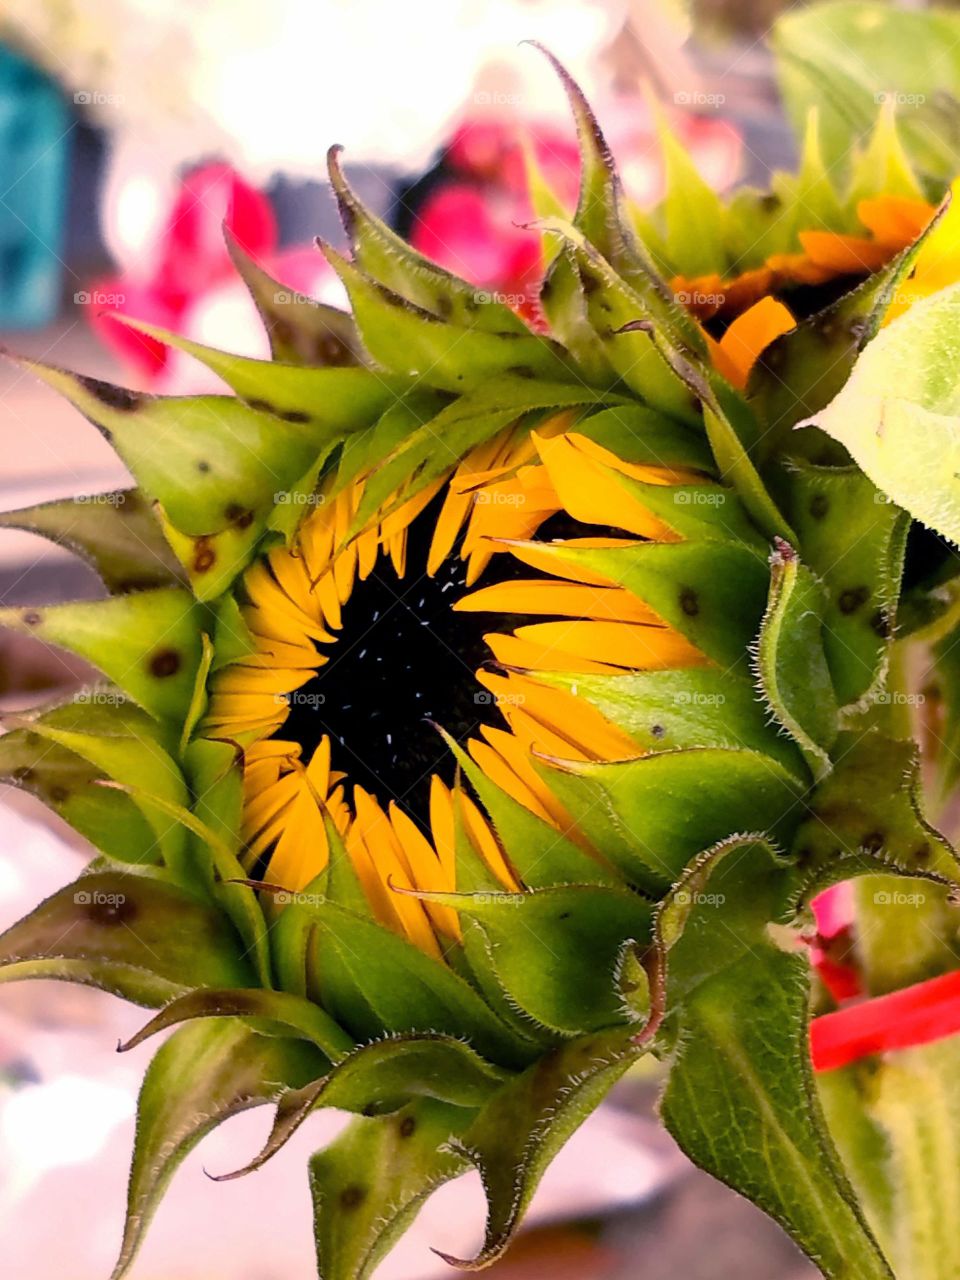 Sunflower caught my eye at the Hill's Farmers Market